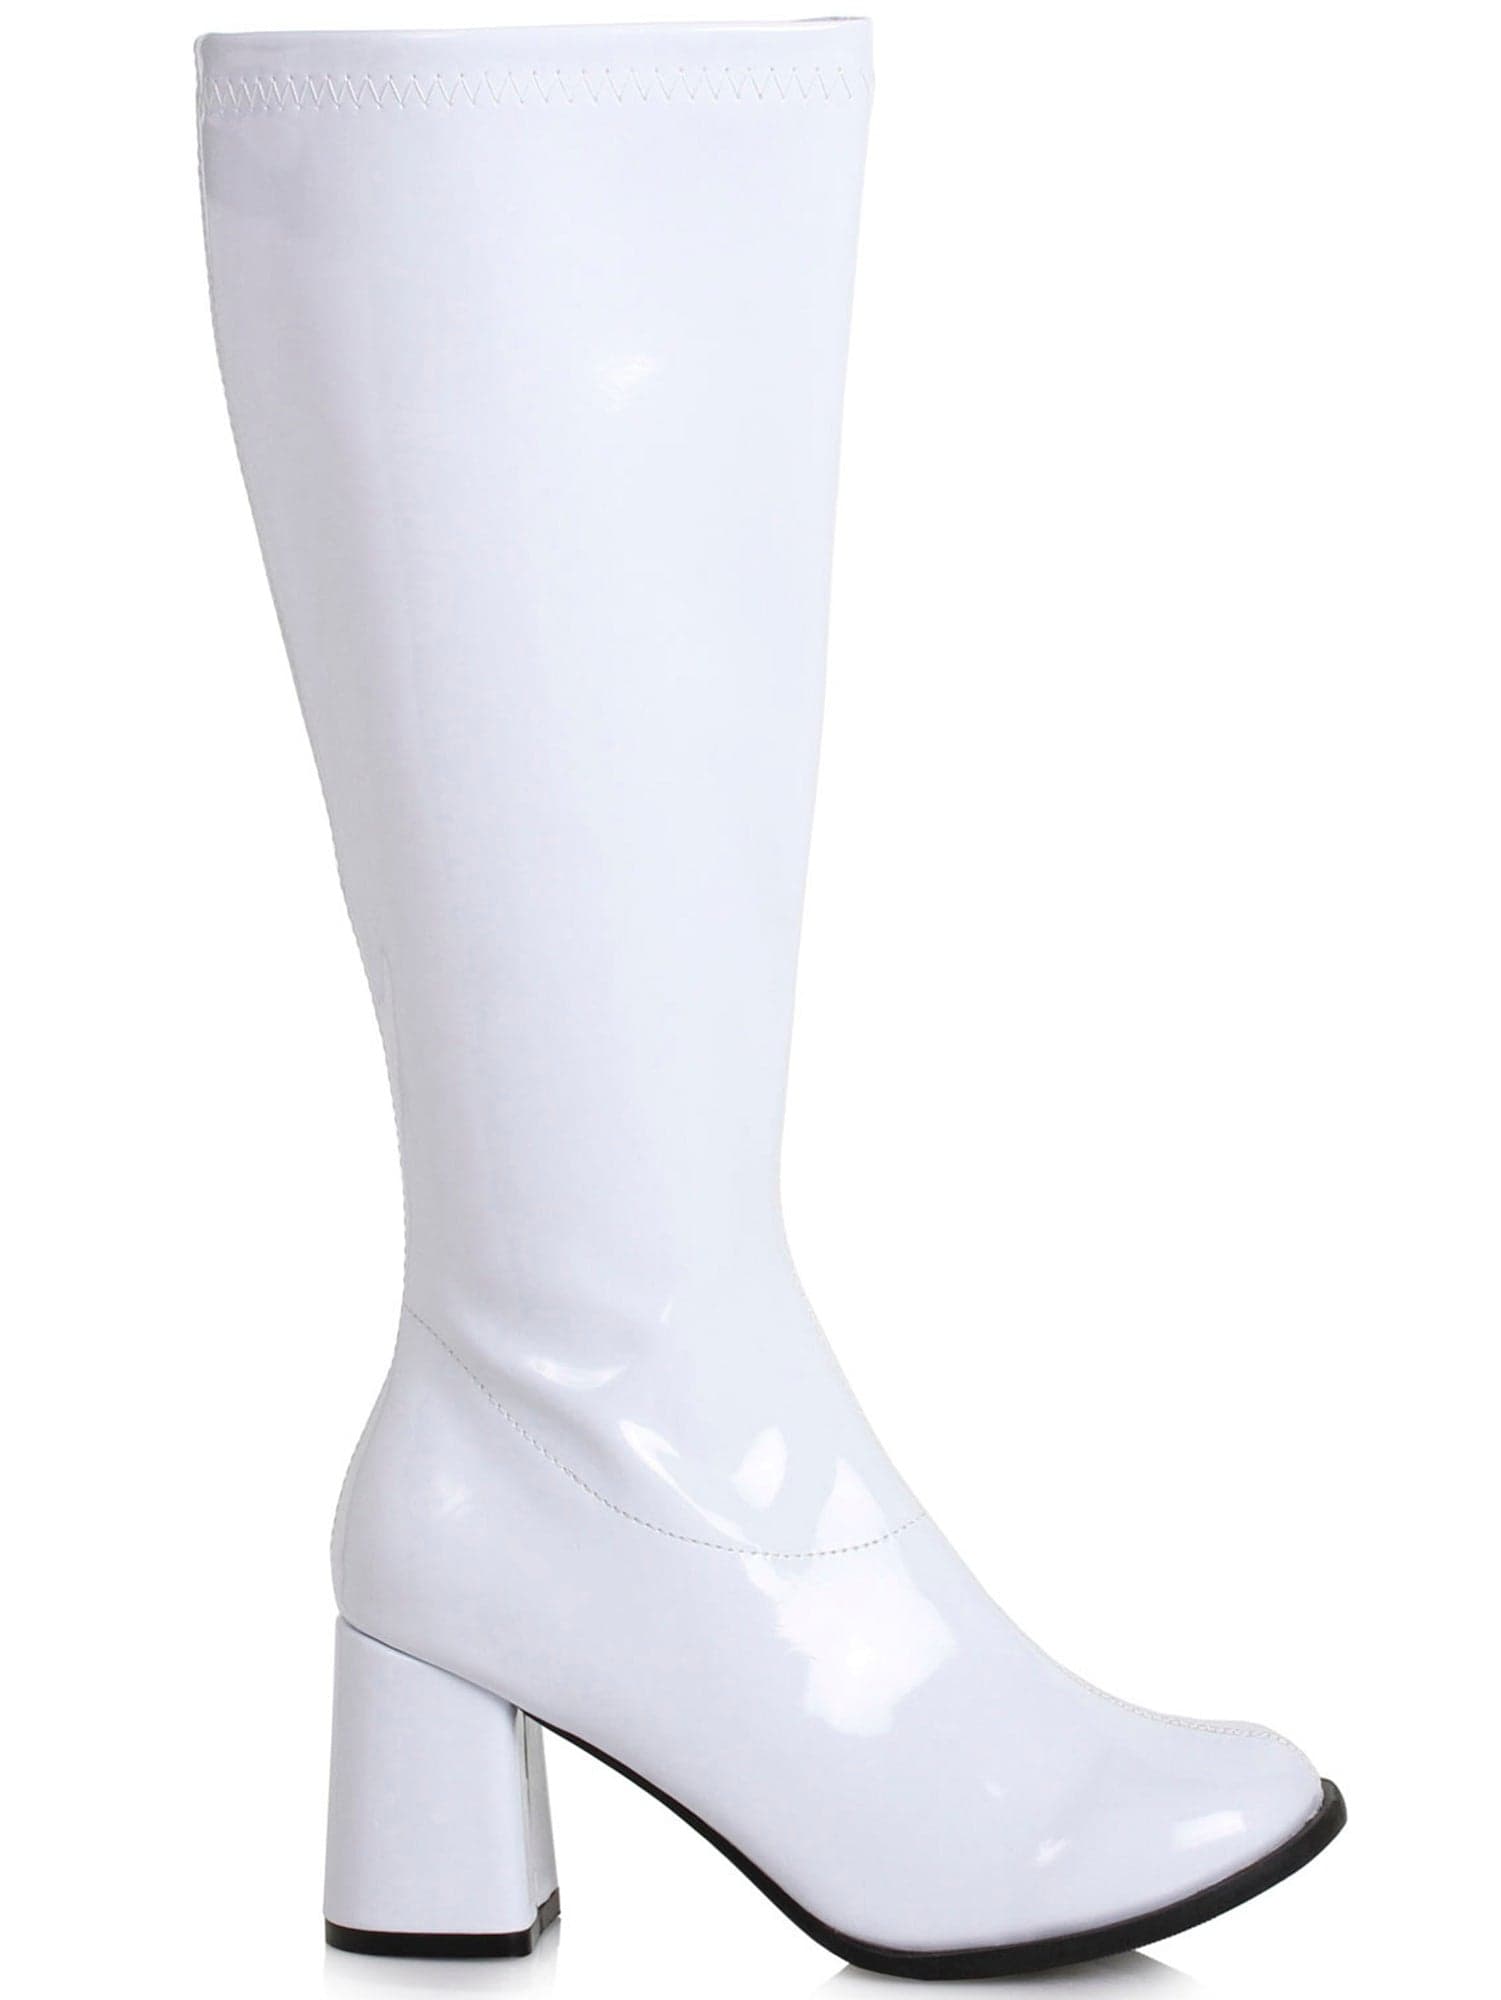 Adult White Wide Width Patent Go Go Boots - costumes.com